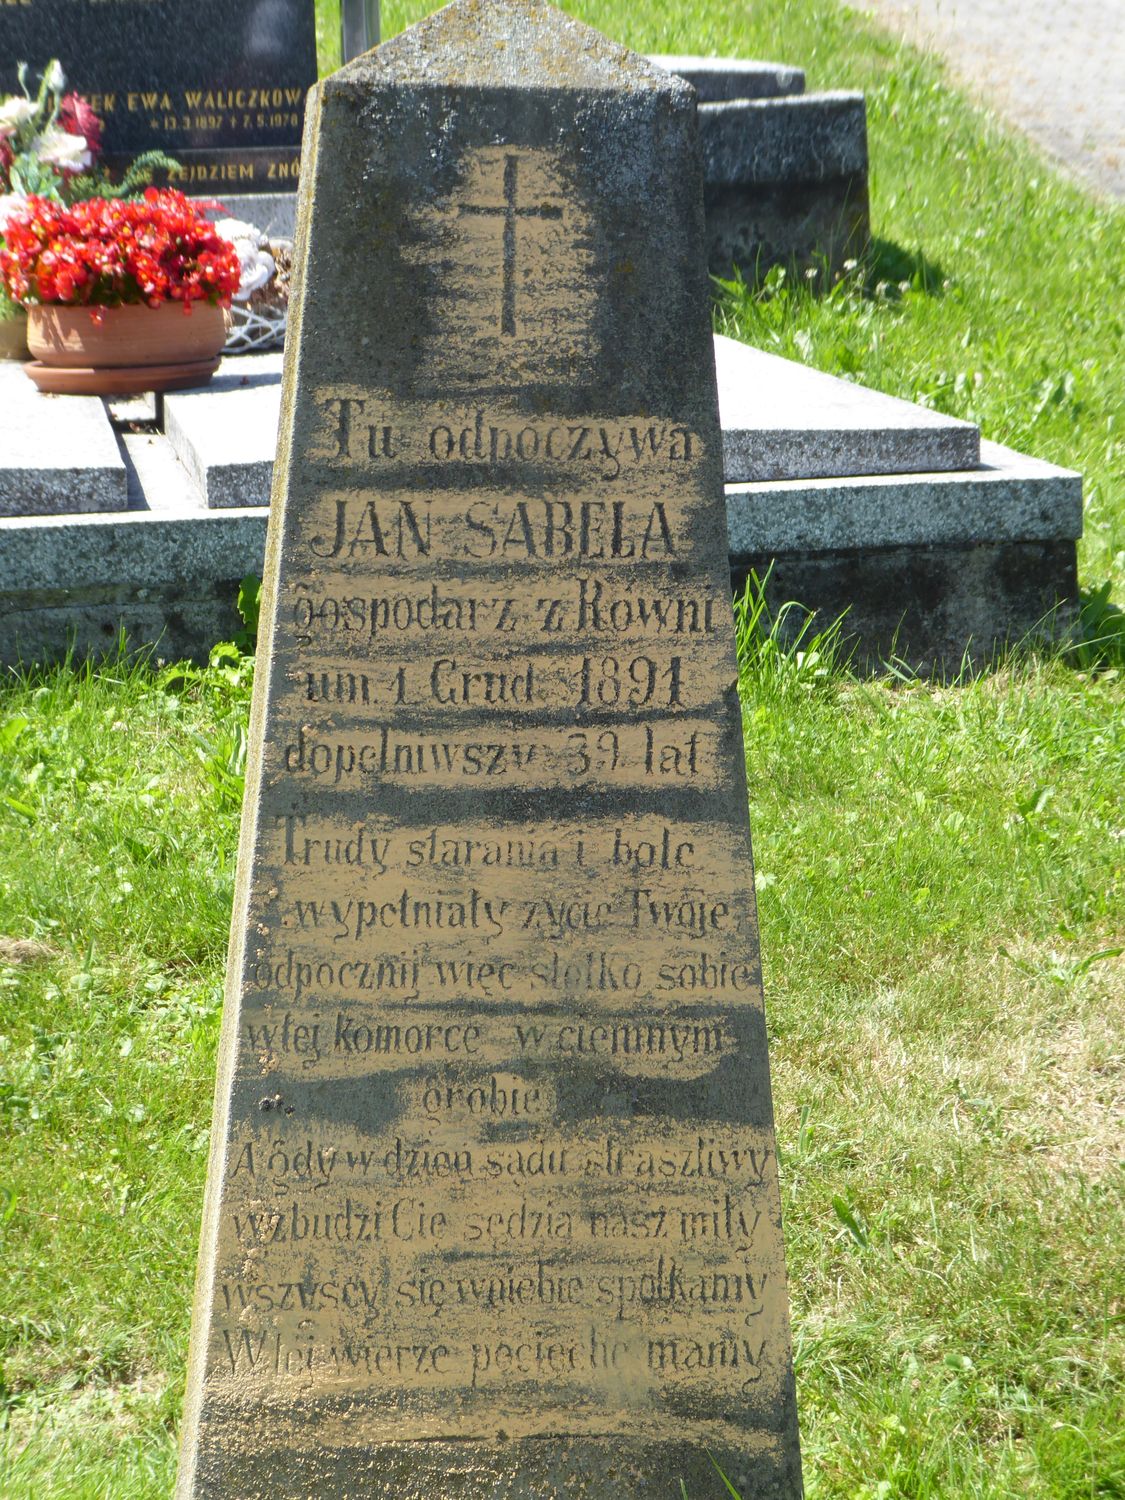 Fragment of Jan Sabel's gravestone from the cemetery of the Czech part of Těšín Silesia, as of 2022.